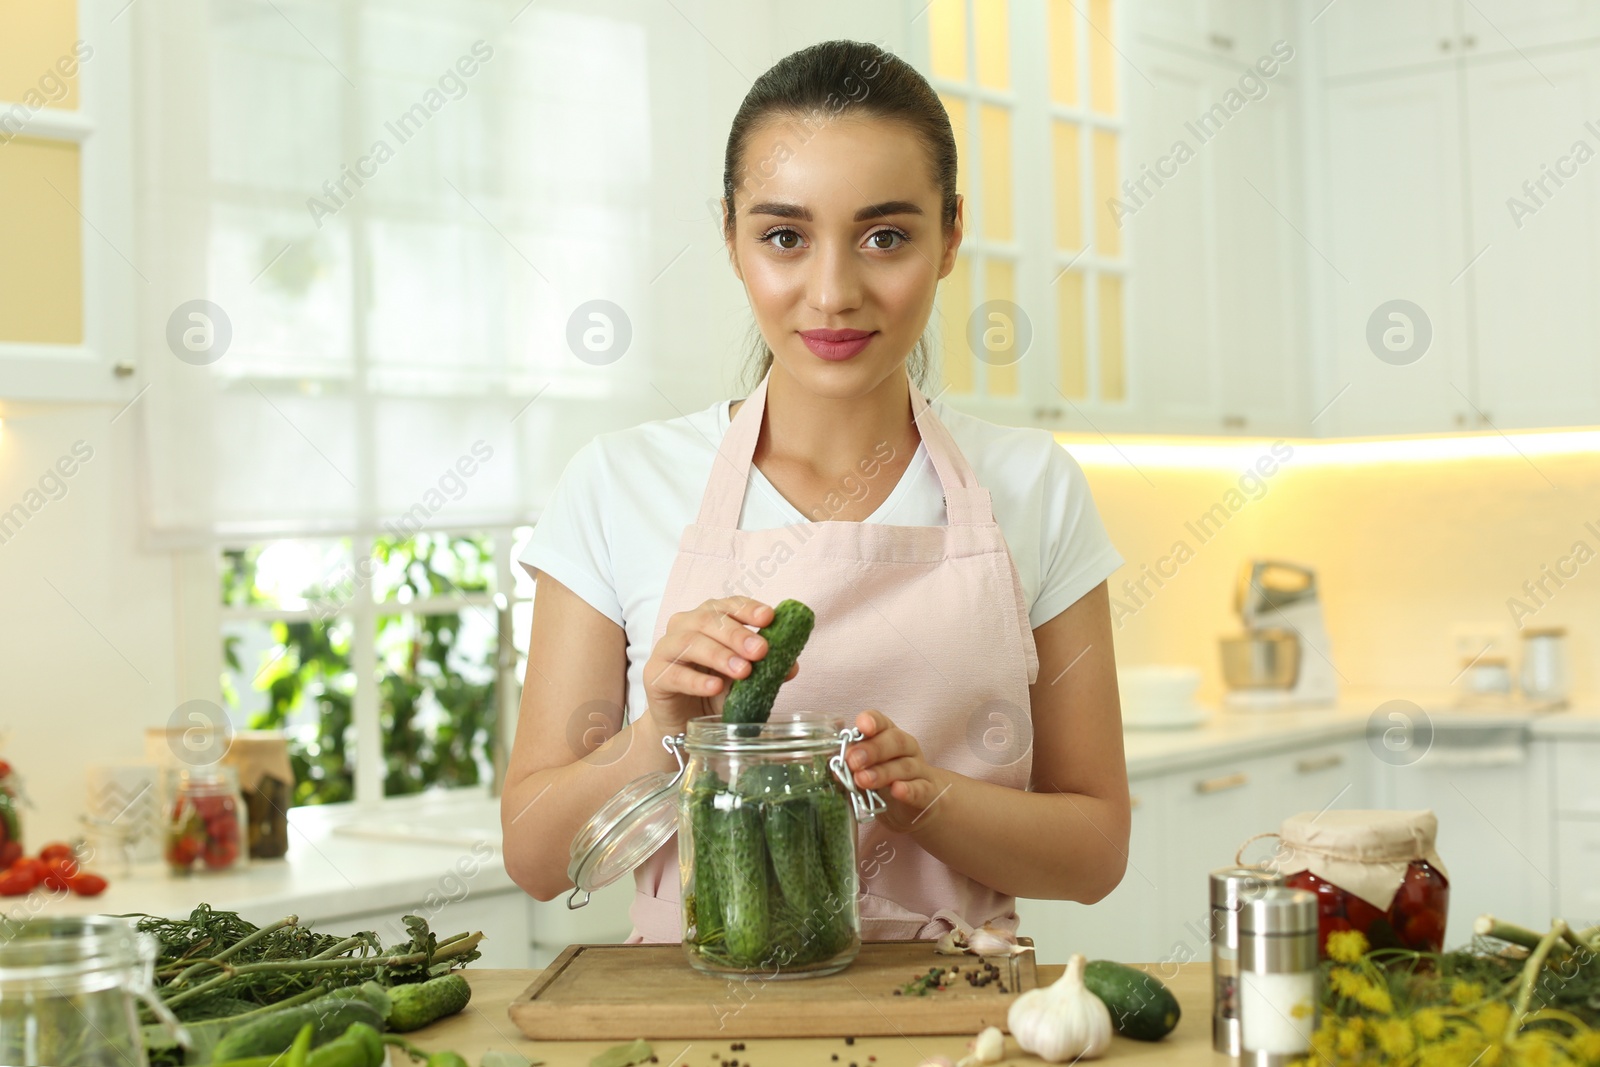 Photo of Woman putting cucumber into pickling jar at table in kitchen